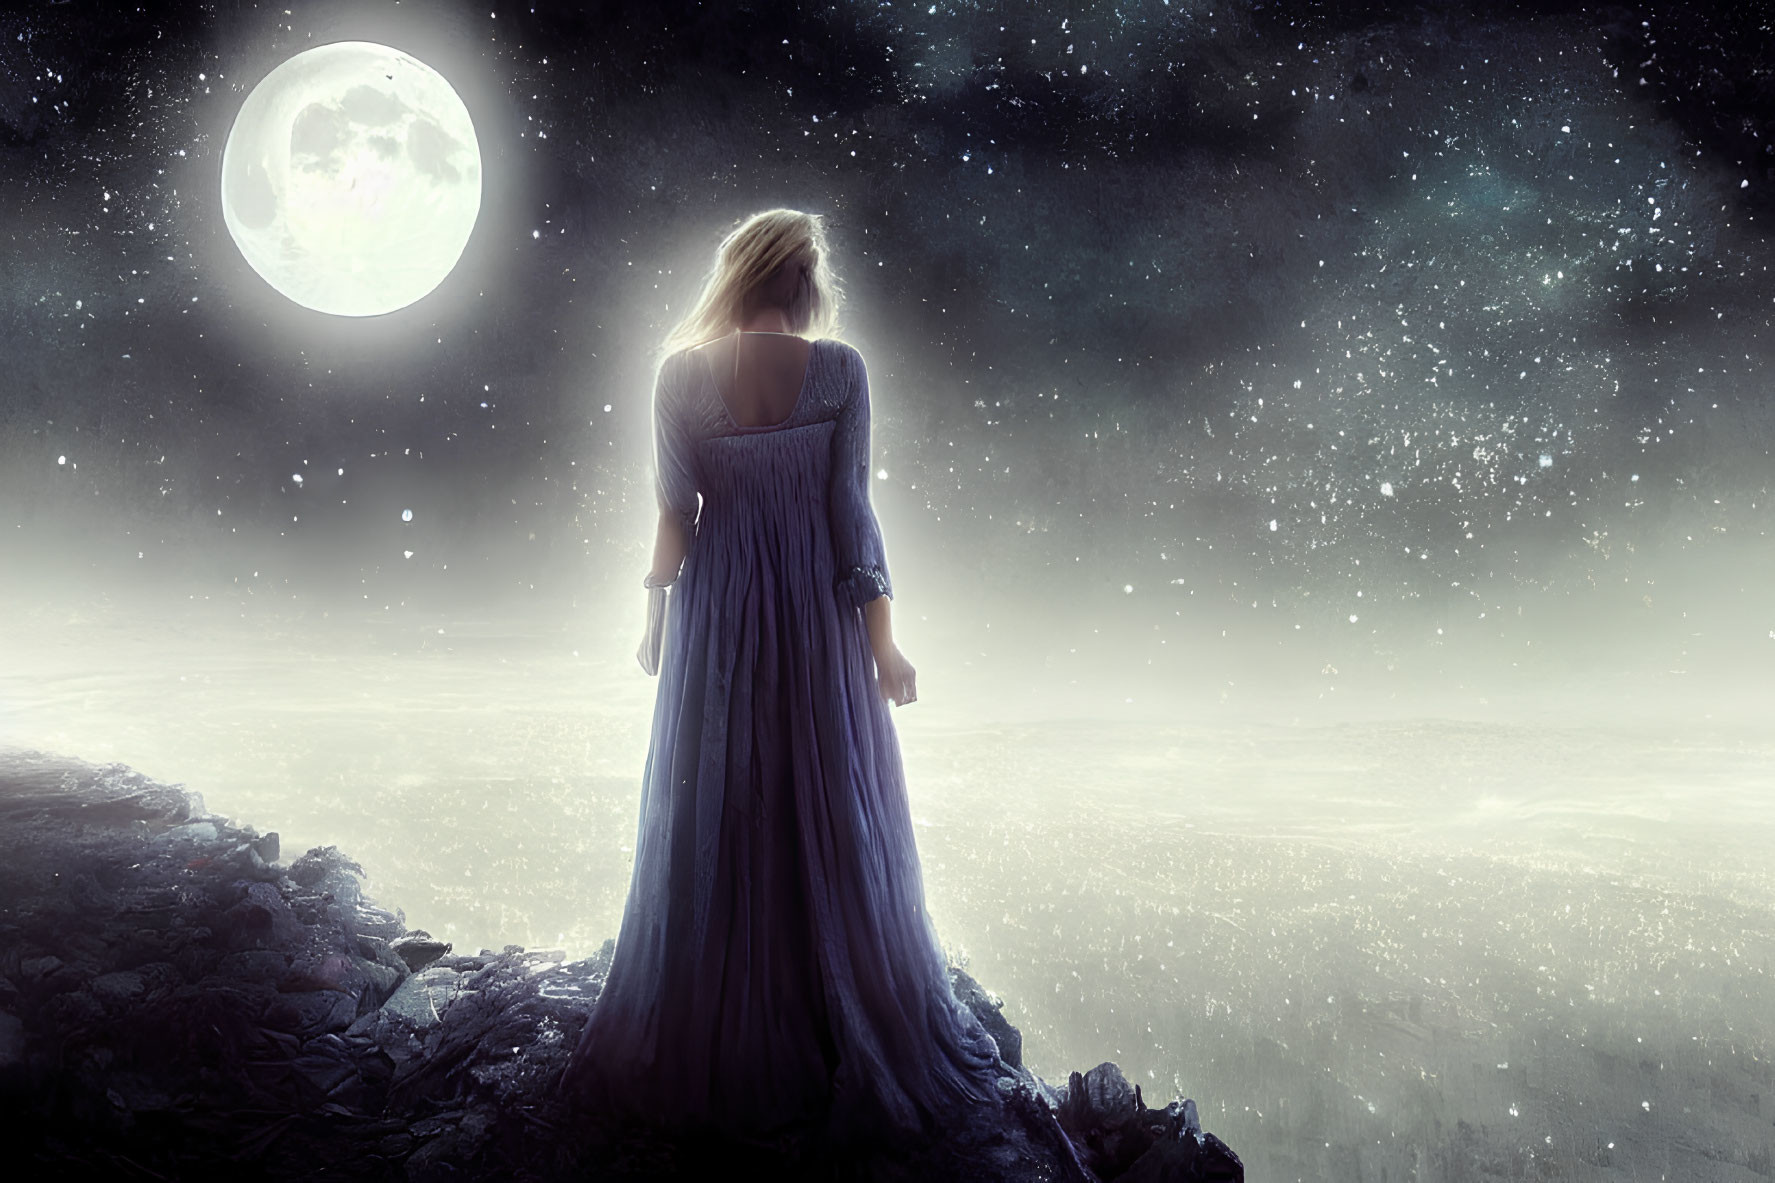 Woman in flowing dress gazes at starlit sky on cliff under full moon